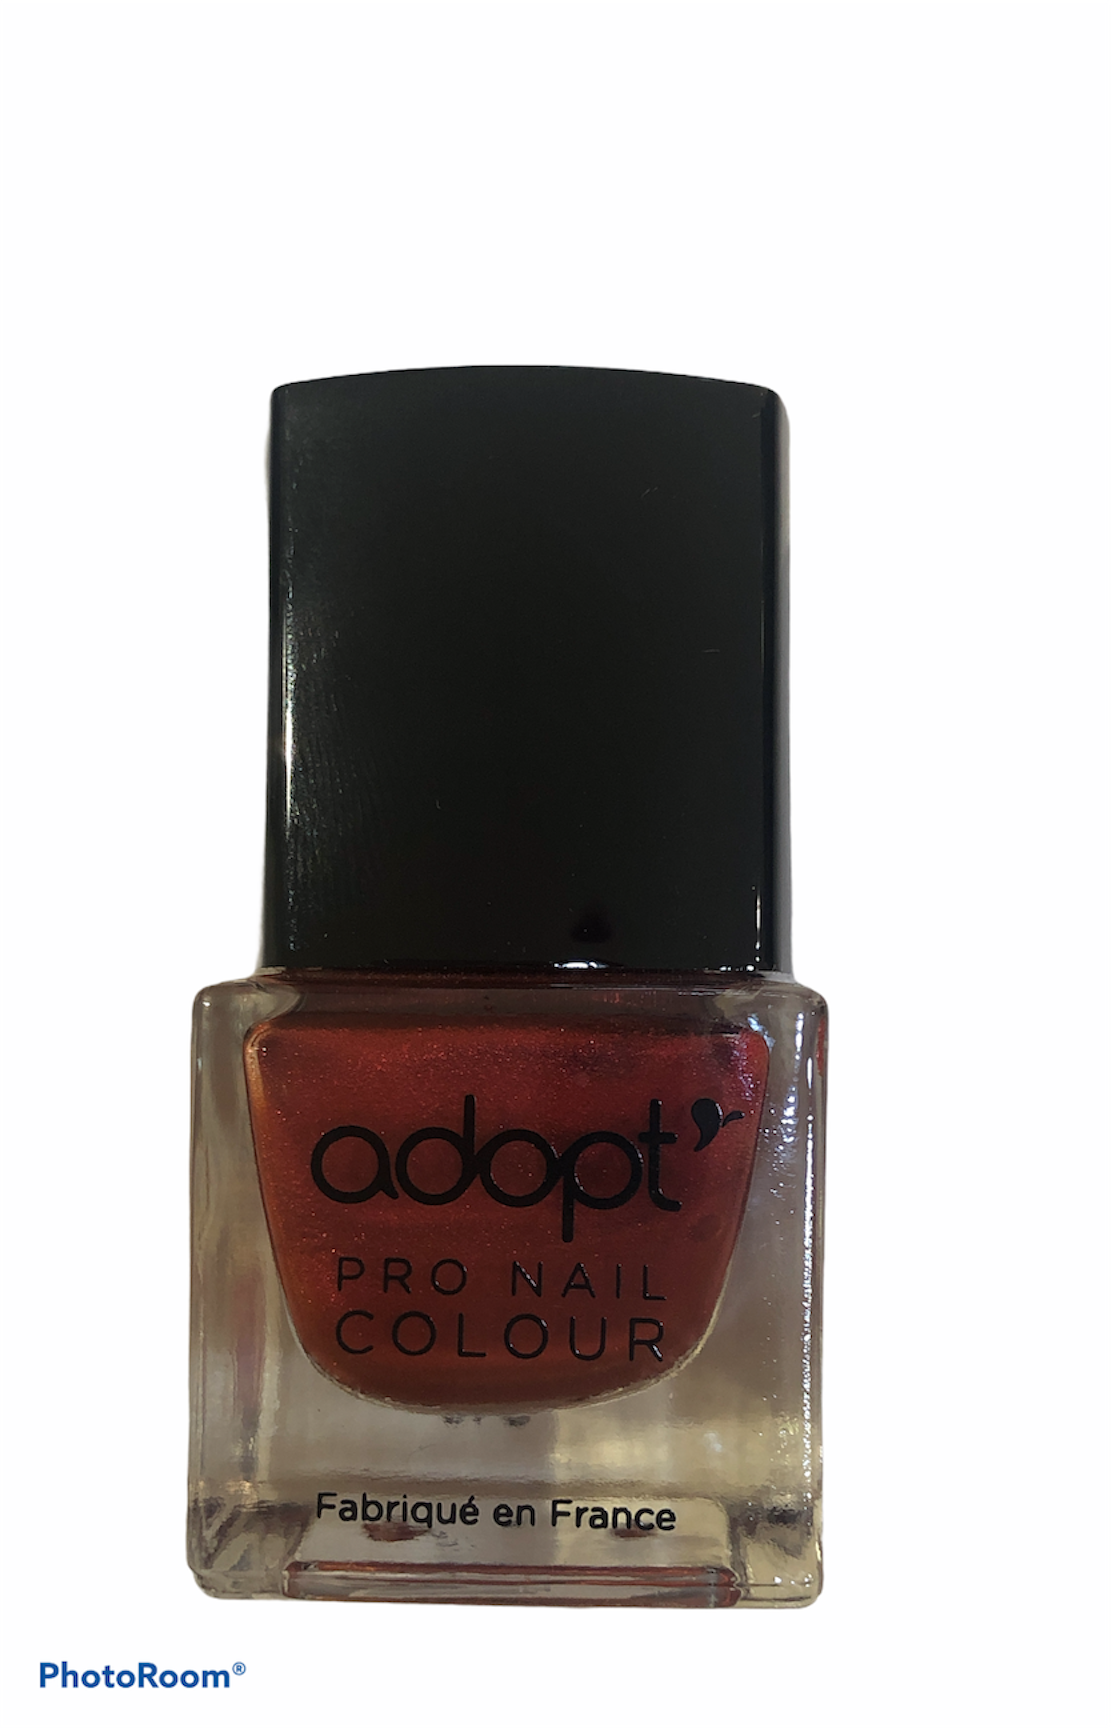 Vernis à ongles Pro Nail Colour - Adopt PROMO - Maquillage, Parfums, Vernis, Rouge a levres, Ongles, Homme, Femme, Jolie, Belle, Beaute, beauty, High Class, Top prices, Top Quality, France, 